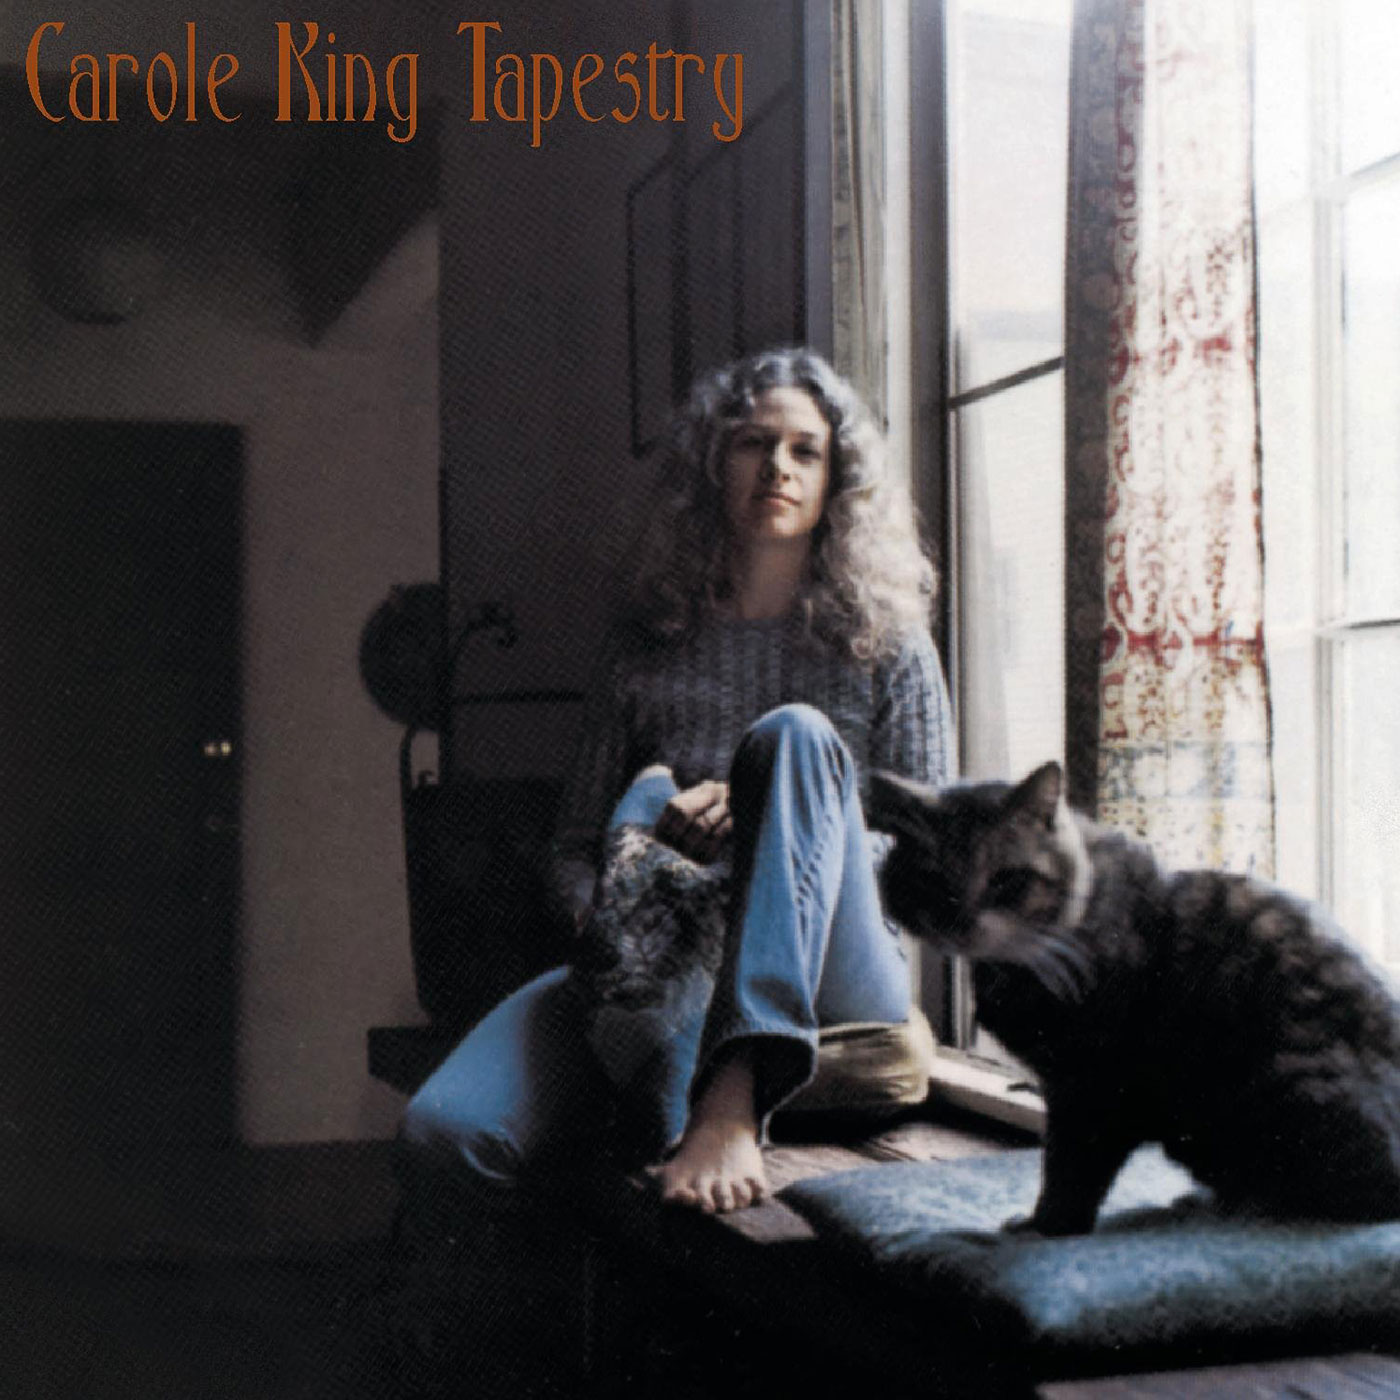 212 Carole King – Tapestry